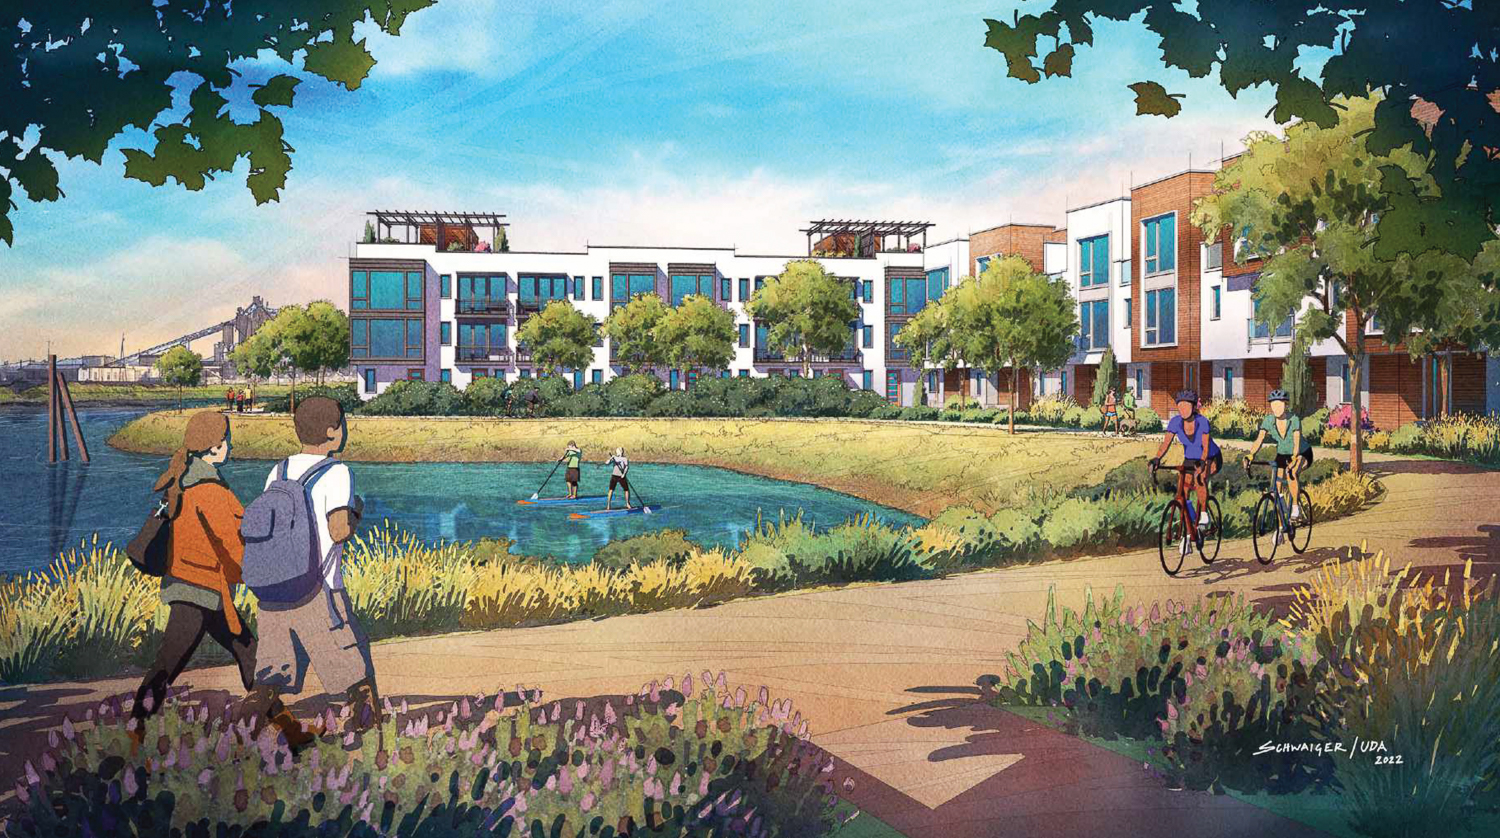 Oyster Cove Apartments waterfront trail, illustration by UDA